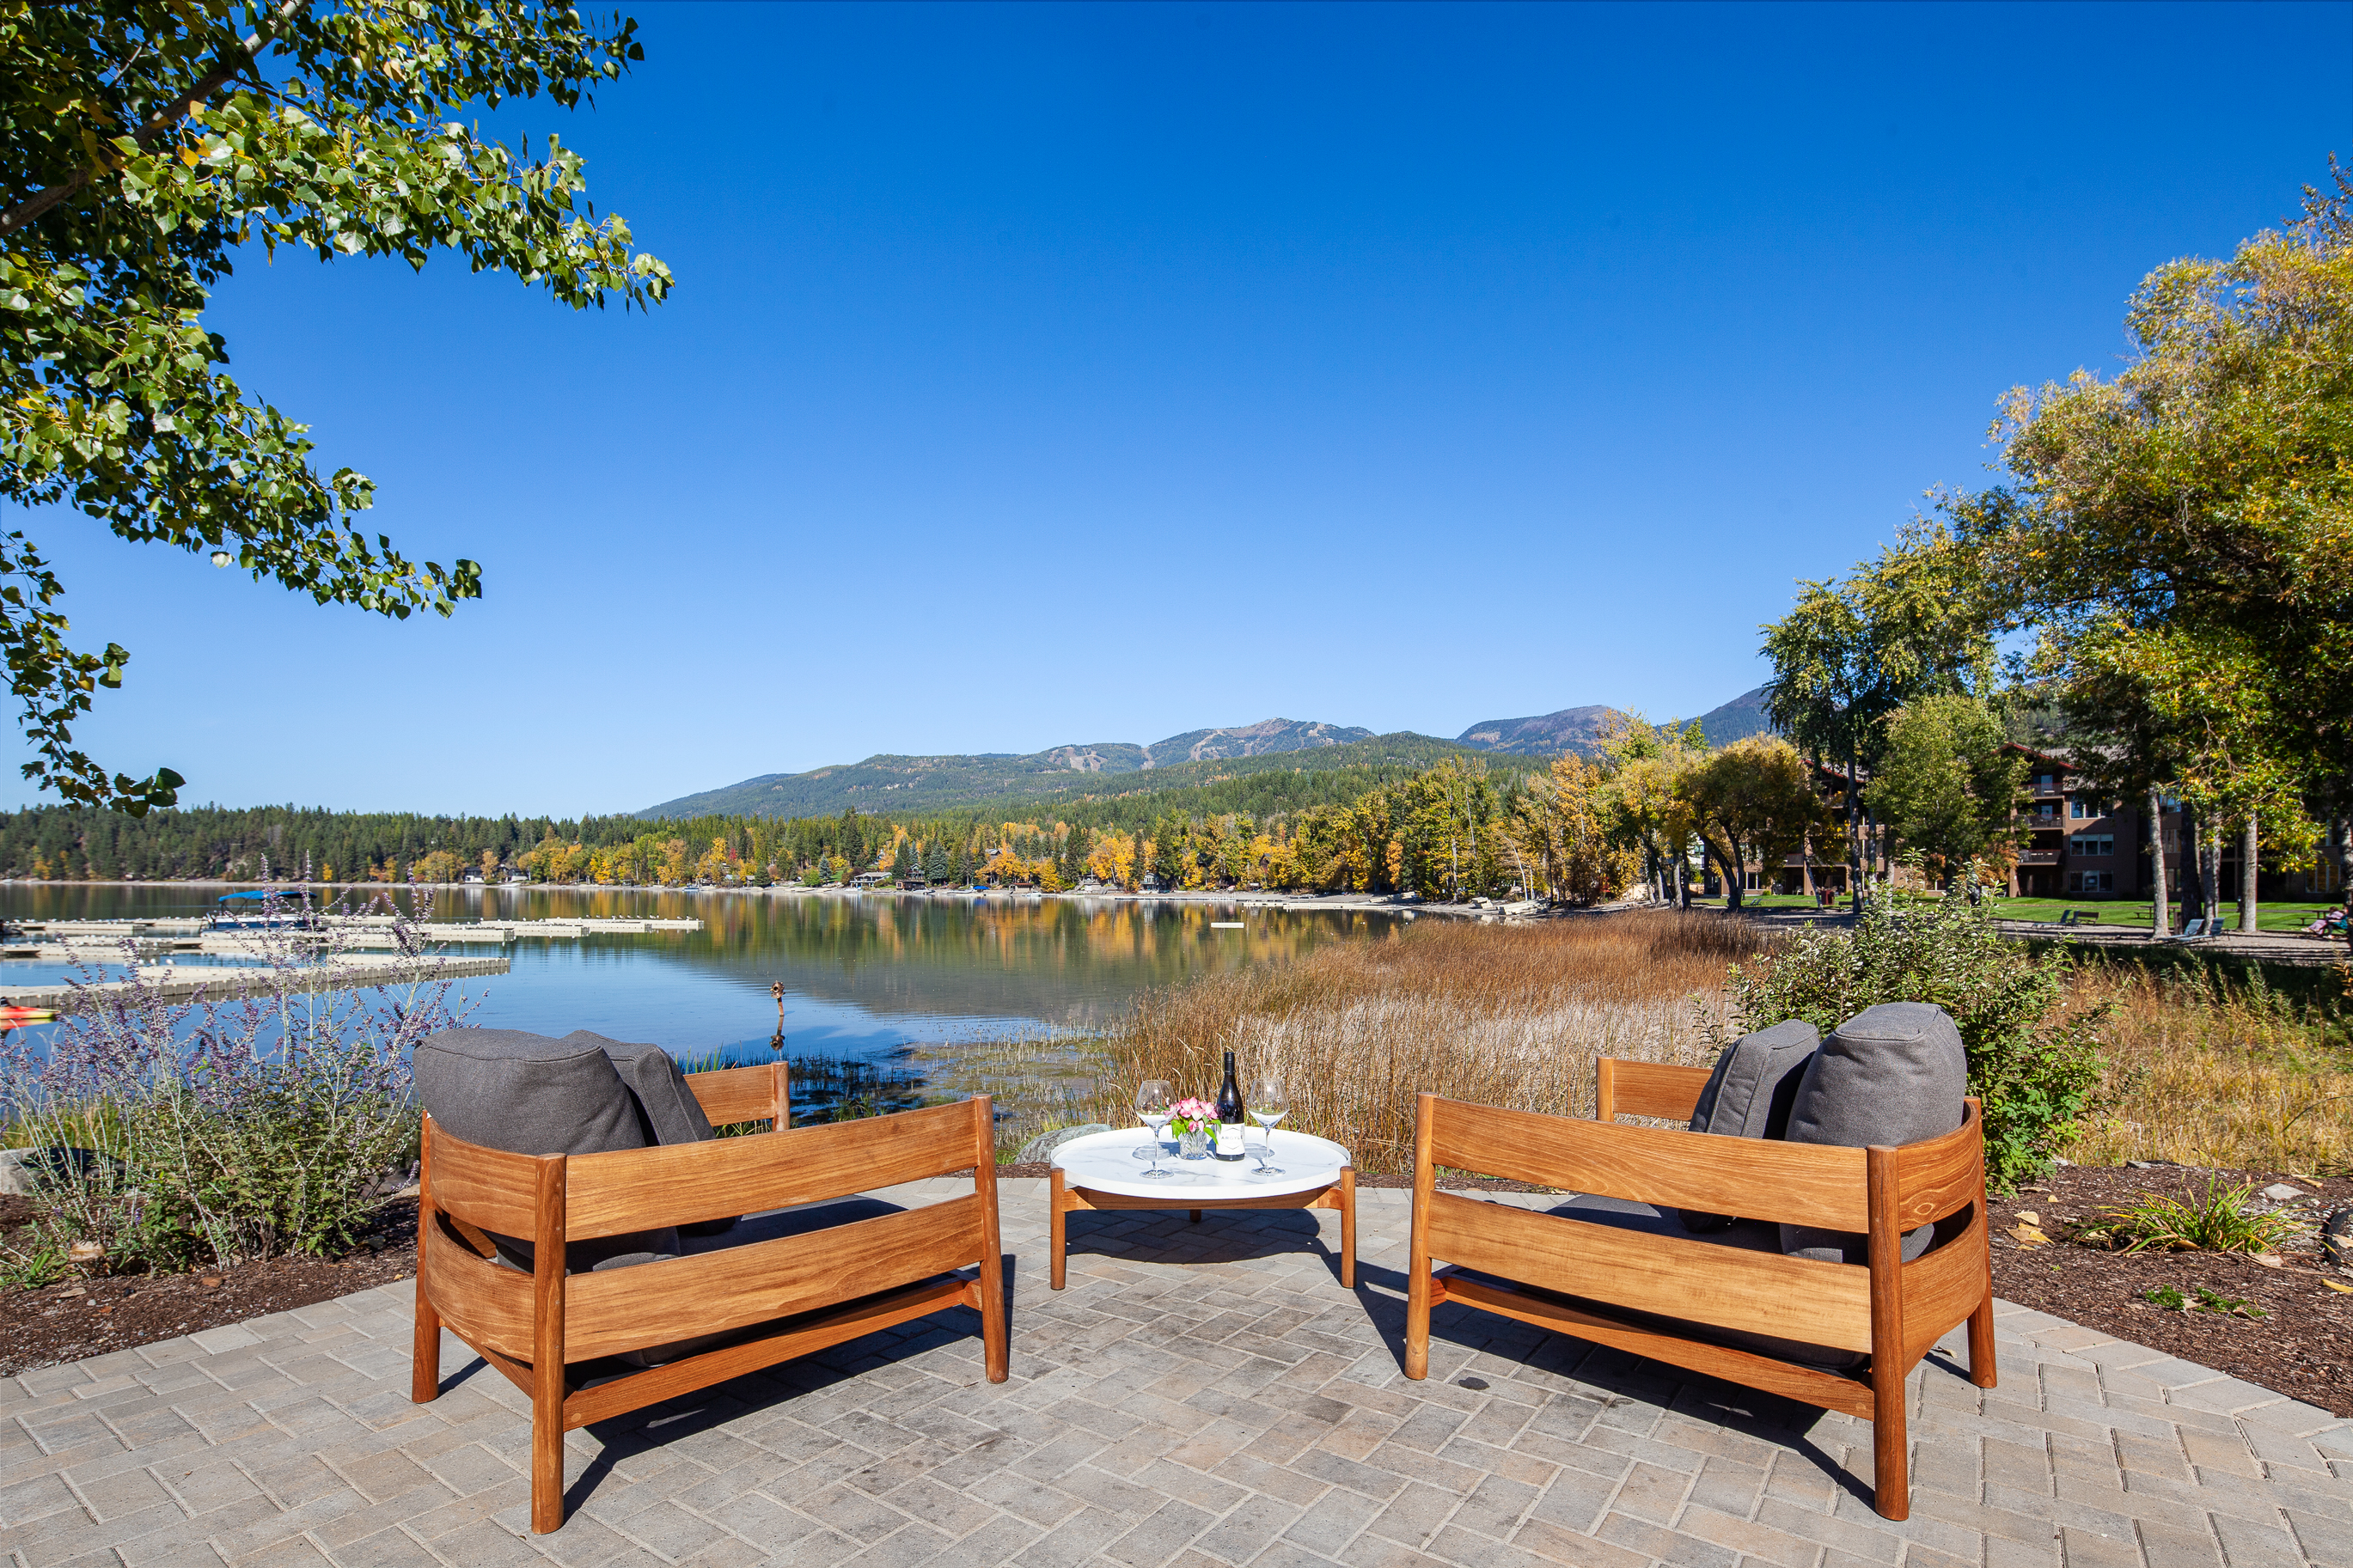 Your lakeside table for two awaits! – Glacier View Studio